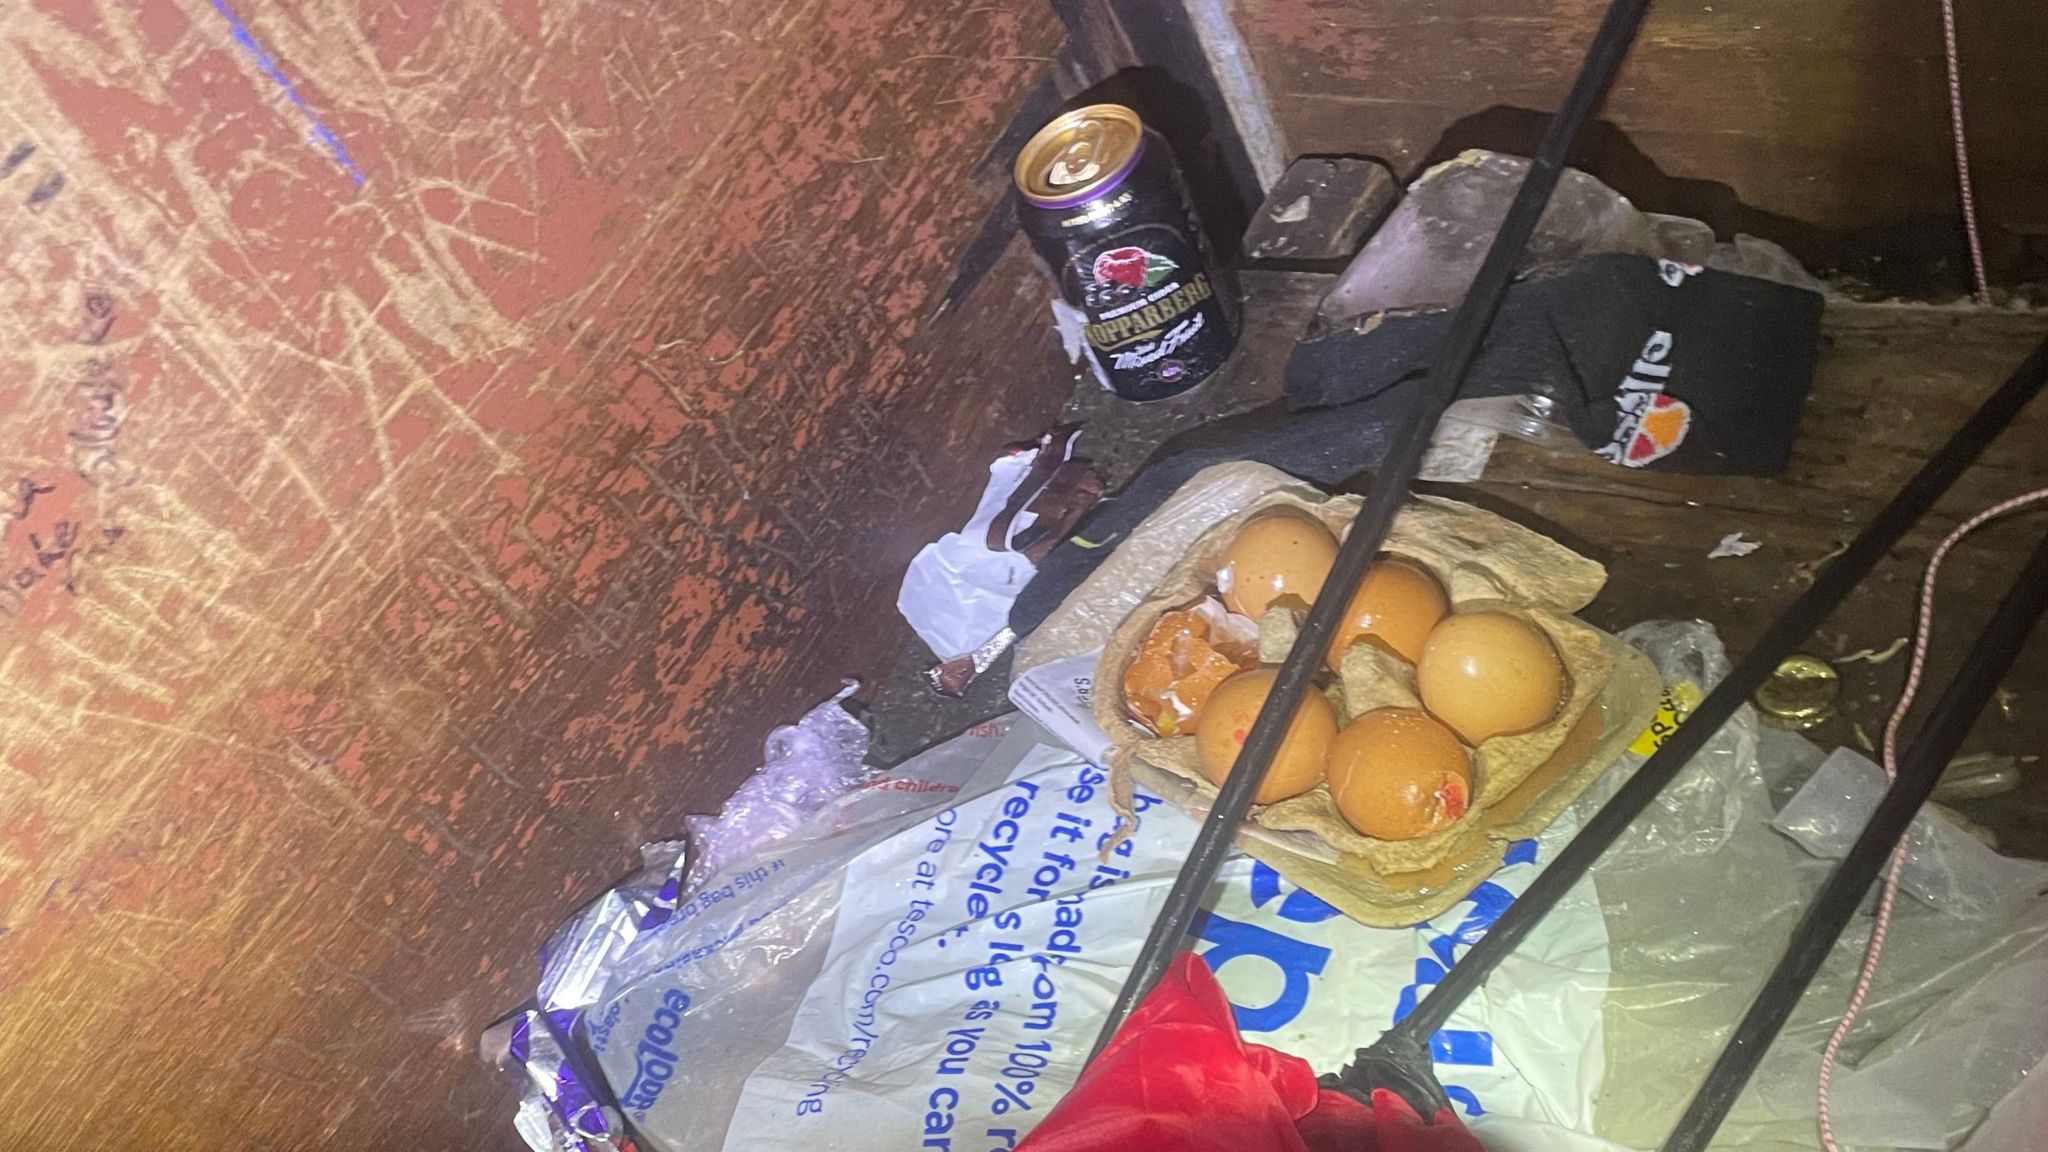 Eggs and food waste in a shelter